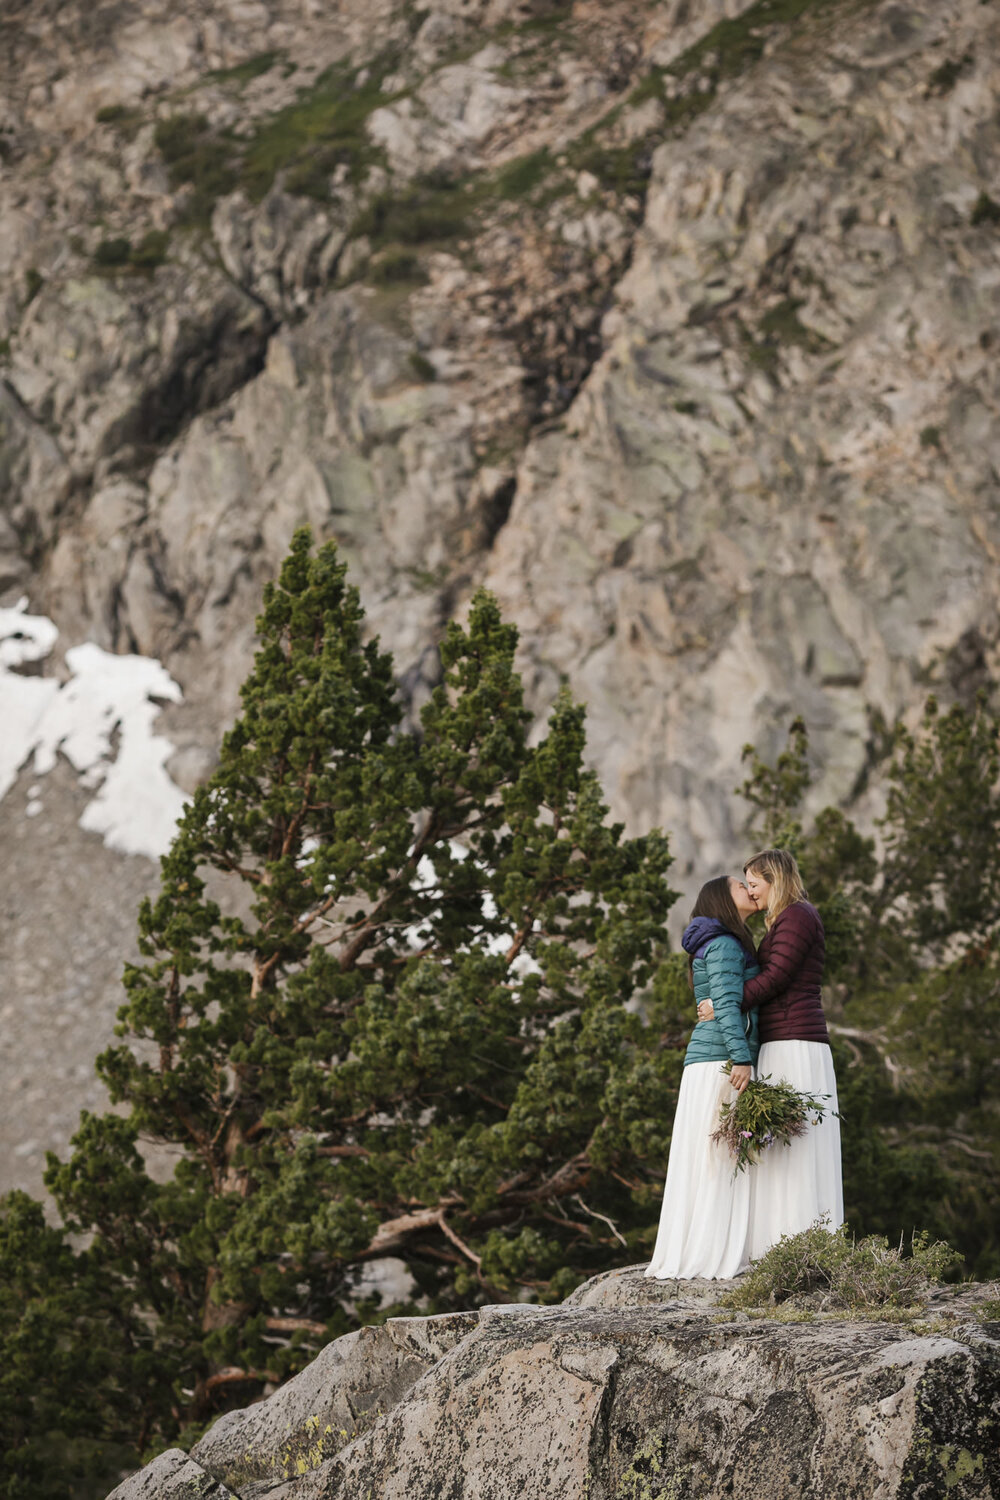 Wedding couple kiss at sunrise during their mountain elopement wearing their puffy jackets and wedding dresses